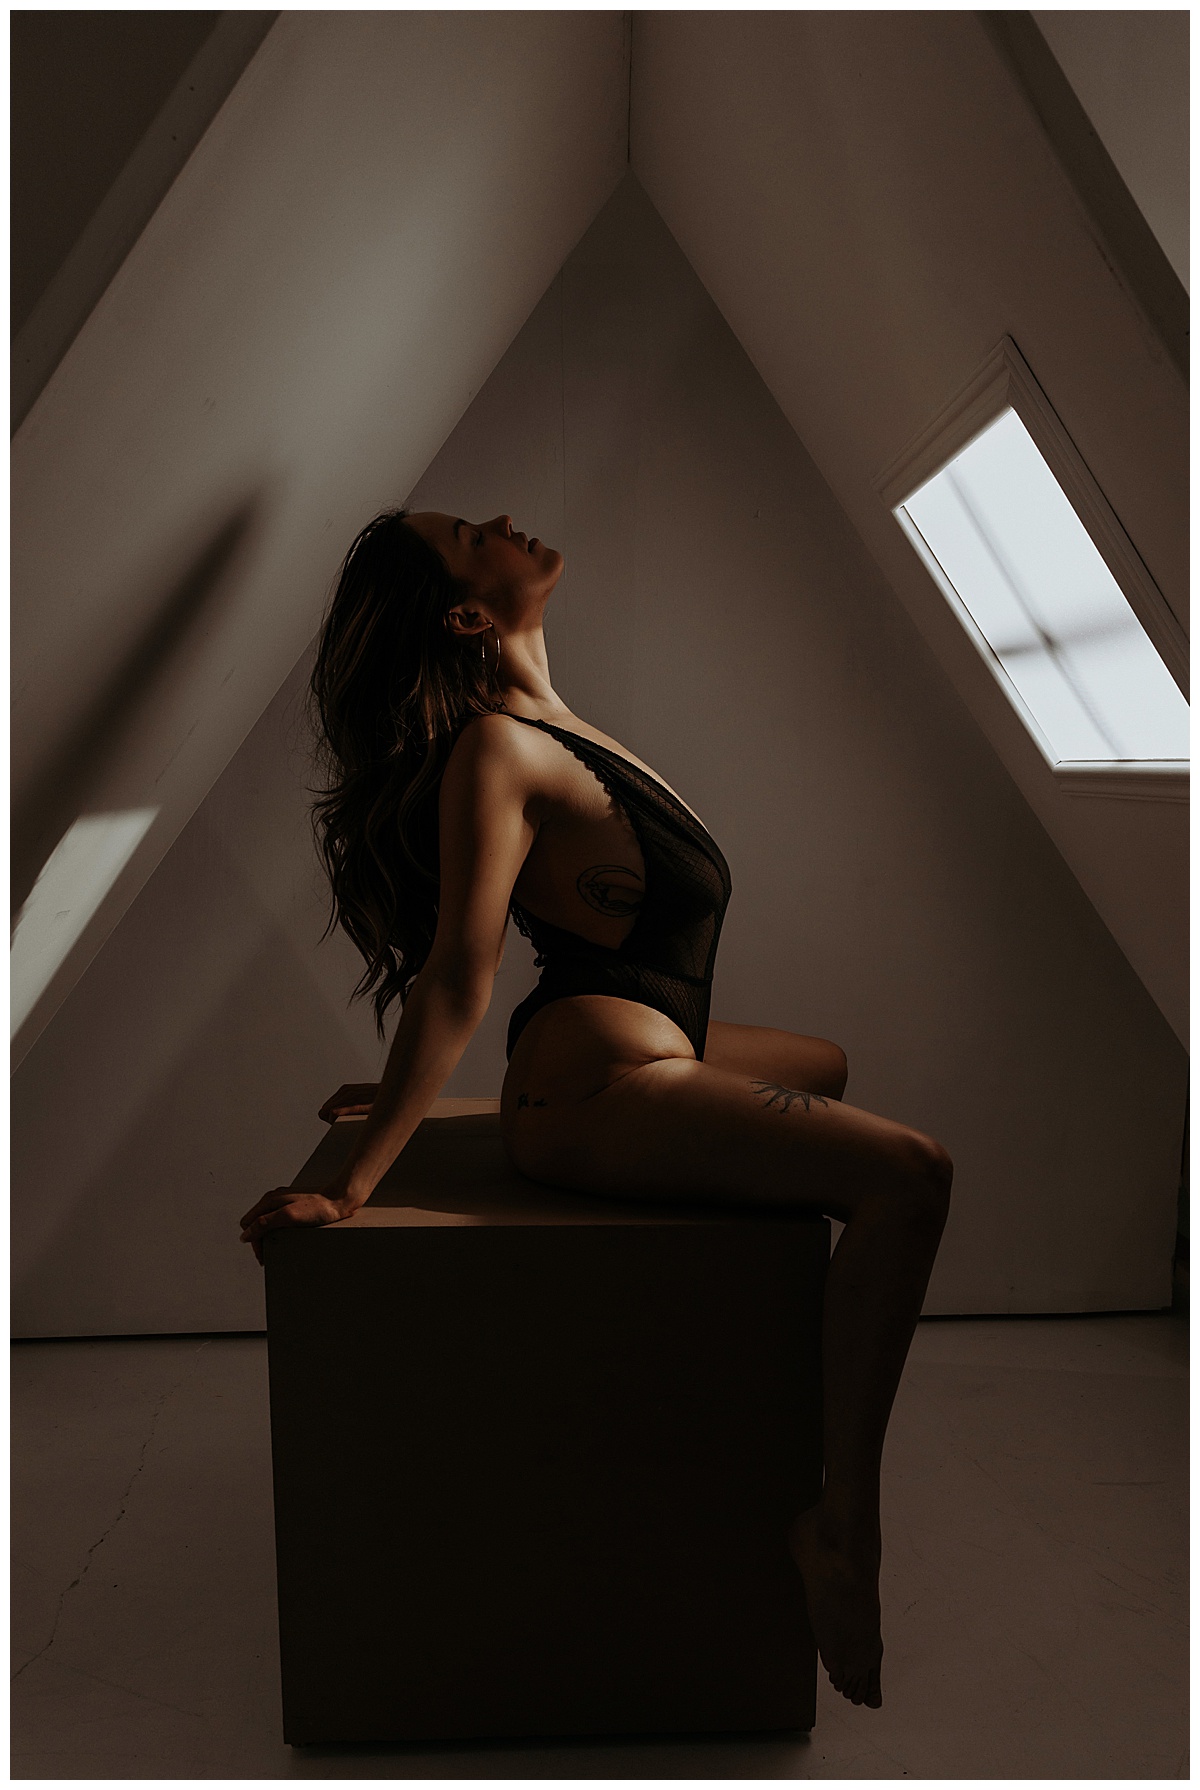 Lady leans back wearing black lingerie for Sultry Skylight Session